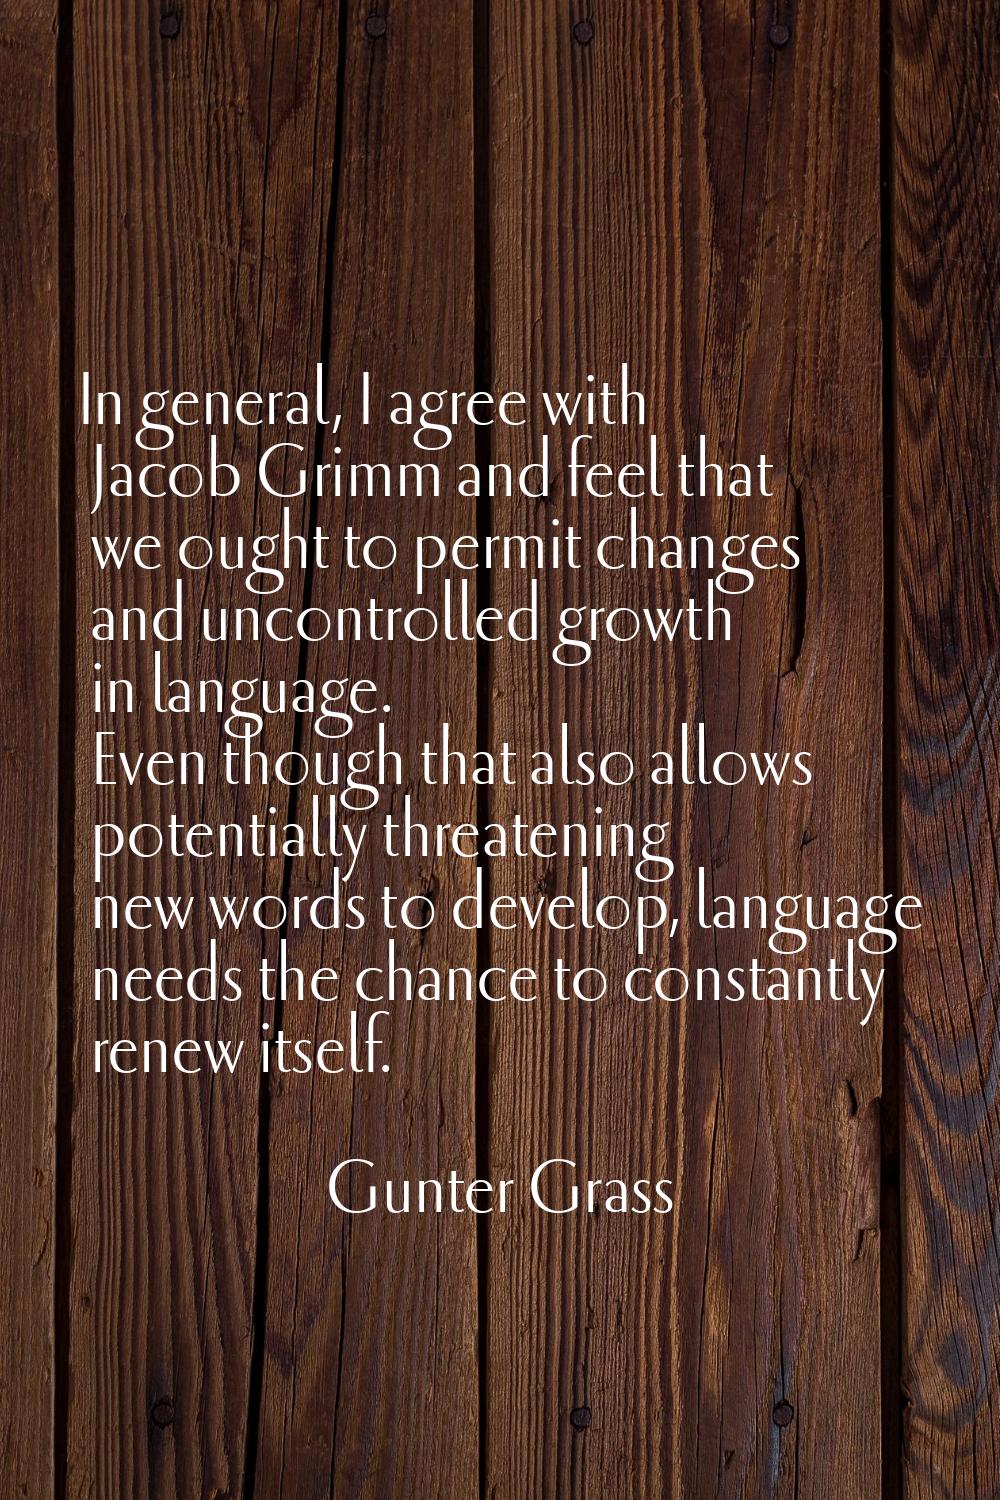 In general, I agree with Jacob Grimm and feel that we ought to permit changes and uncontrolled grow